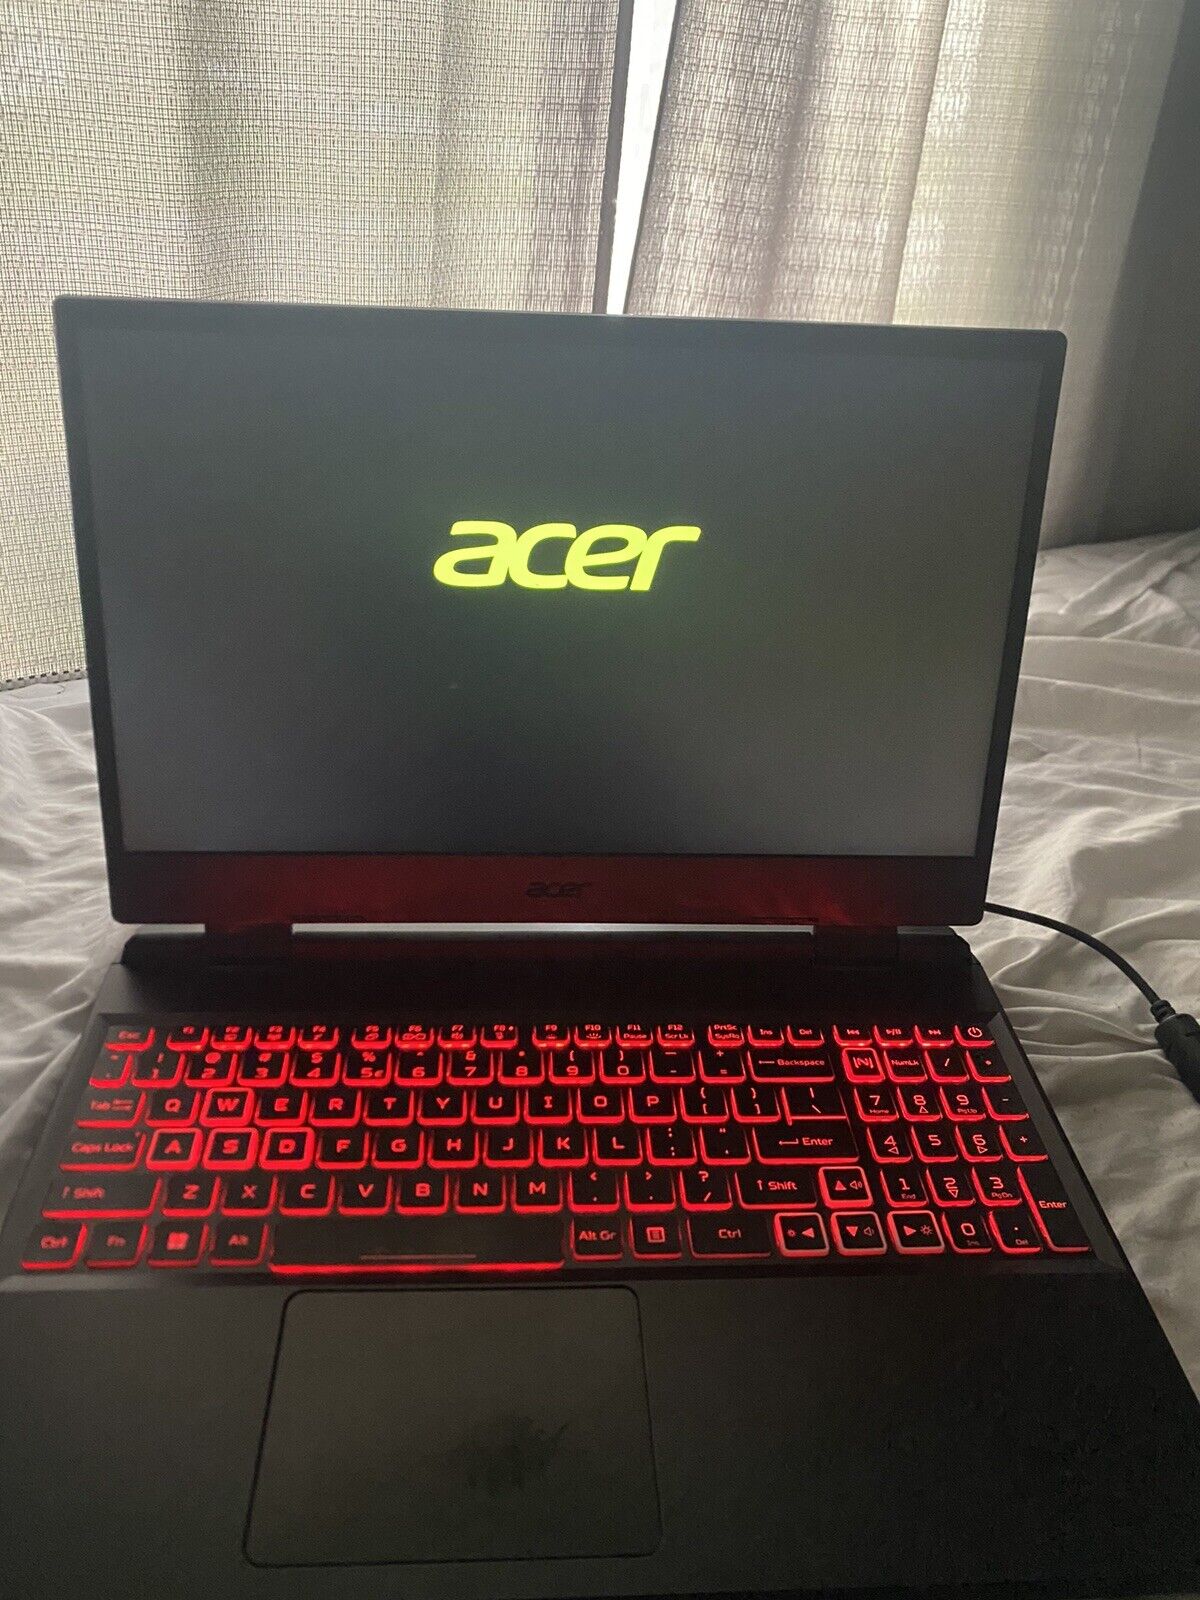 Laptop Acer All Parts Included Take Apart